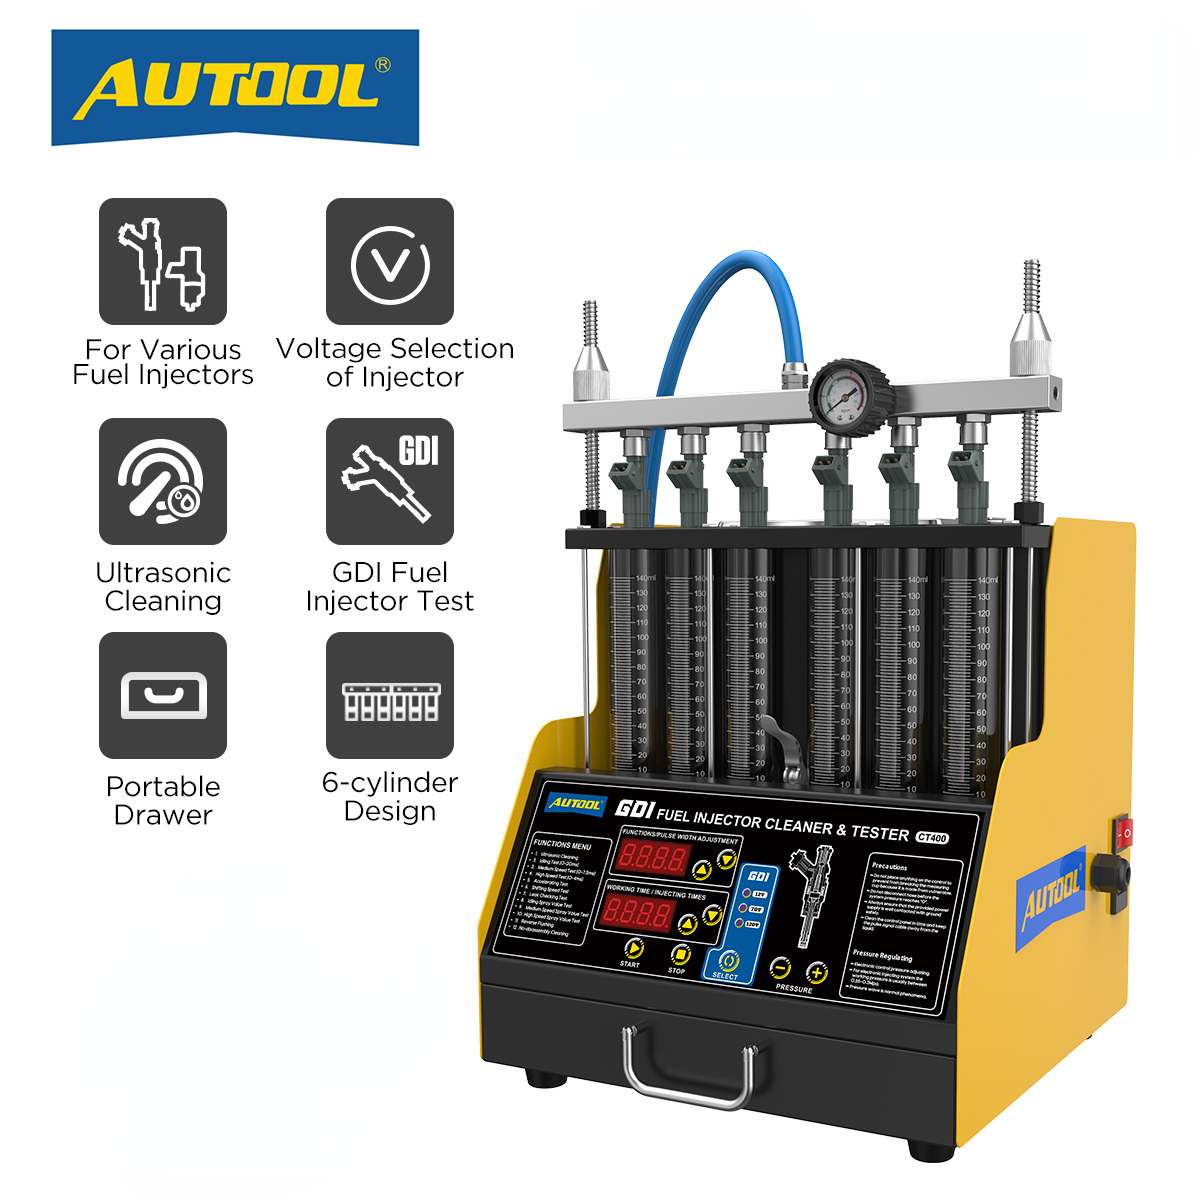 AUTOOL CT400 GDI EFI FEI Fuel Injector Cleaner & Tester Machine 6 Cylinders Fuel Injector Cleaner Tester for Car & Motorcycle